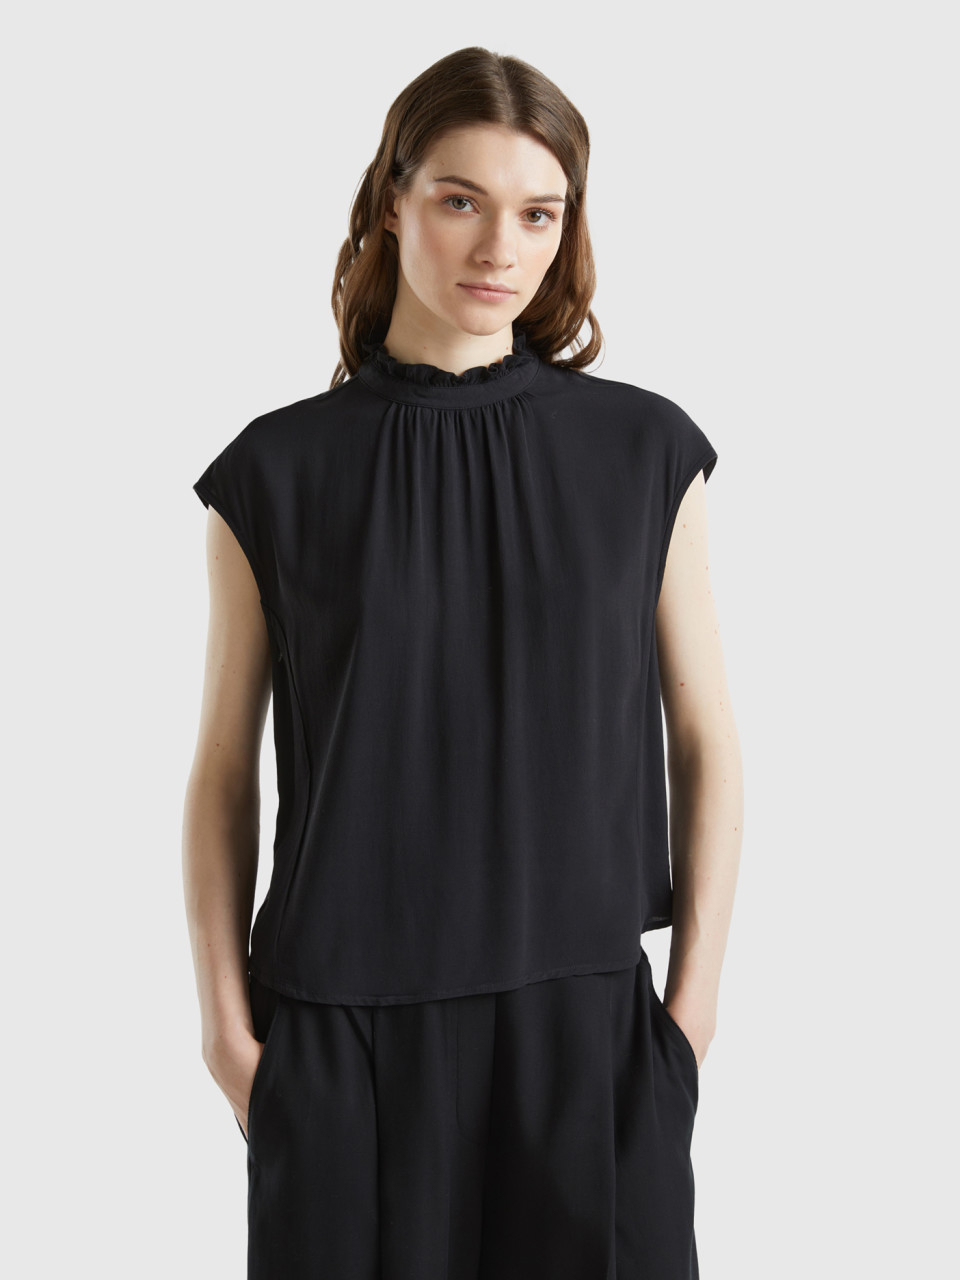 Benetton, Blouse With Rouches On The Neck, Black, Women